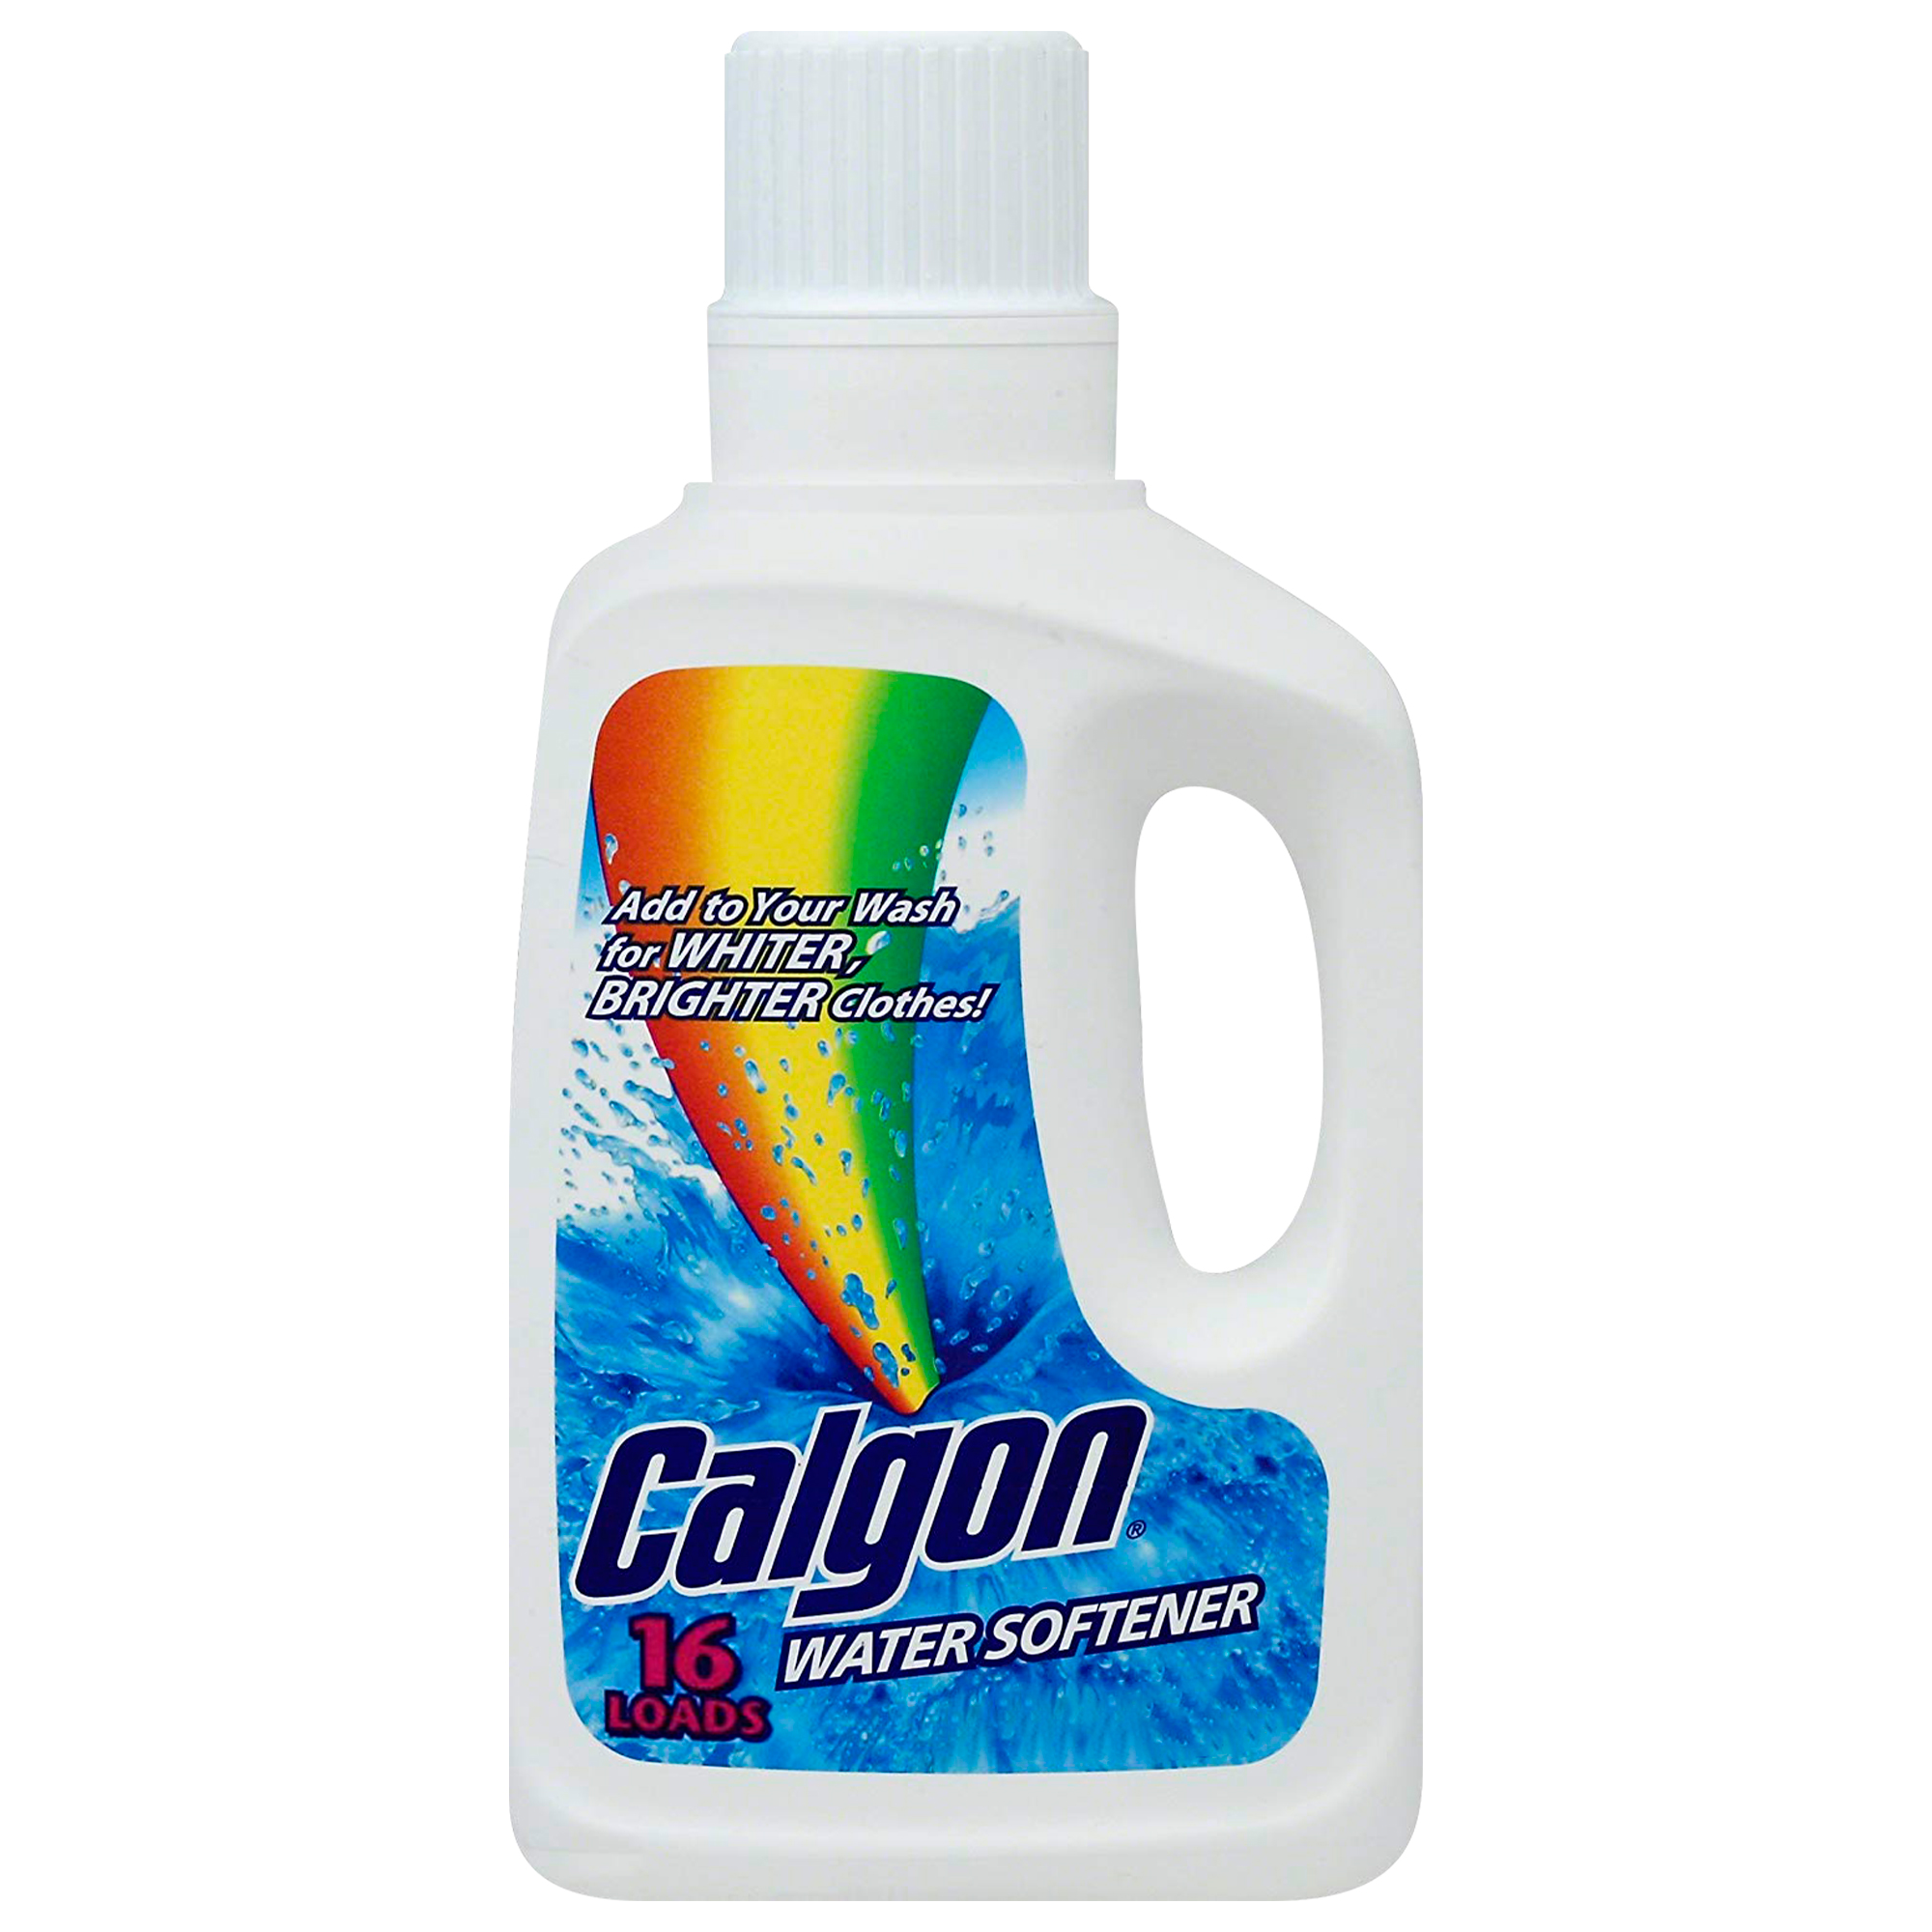 Calgon Water Softener, 32oz Bottle, Laundry Detergent Booster - image 1 of 6